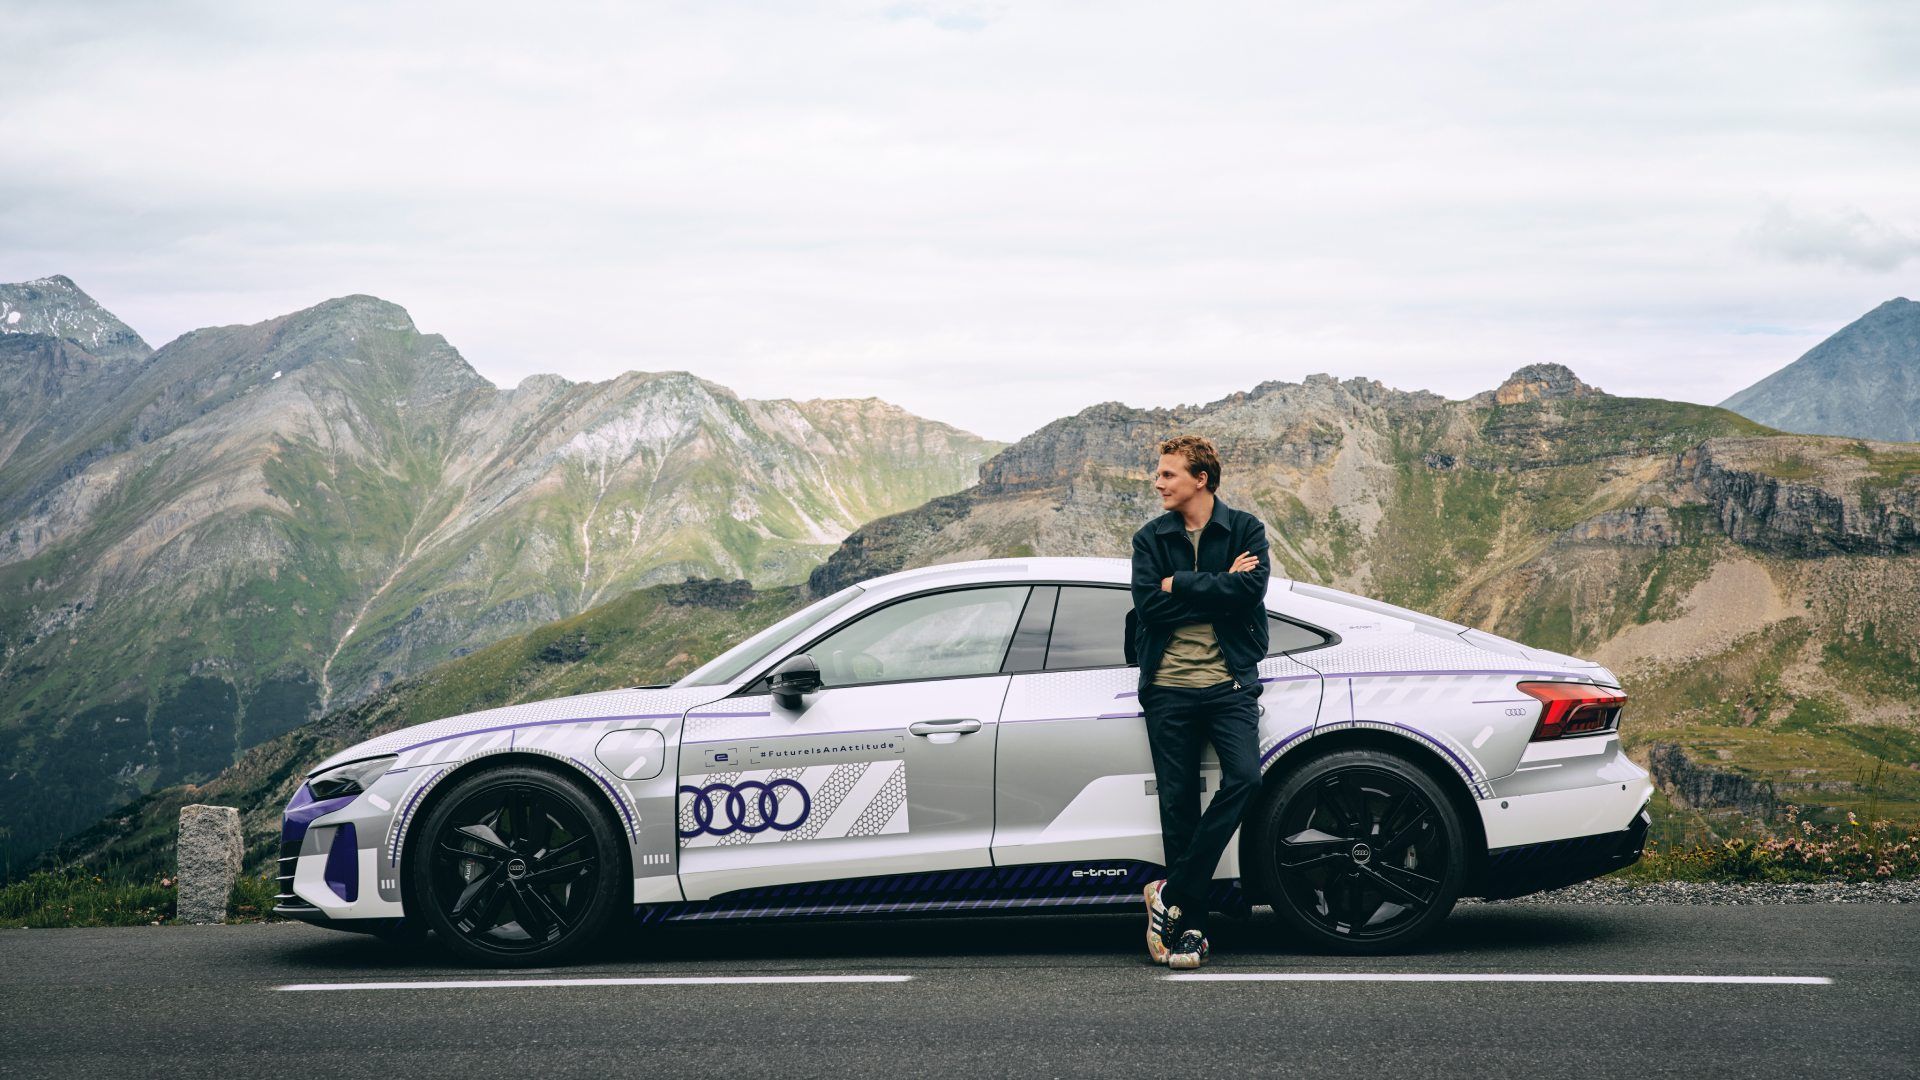 Ferdinand Porsche leaning on the Audi RS e-tron GT ice race edition. In the background is mountain scenery.